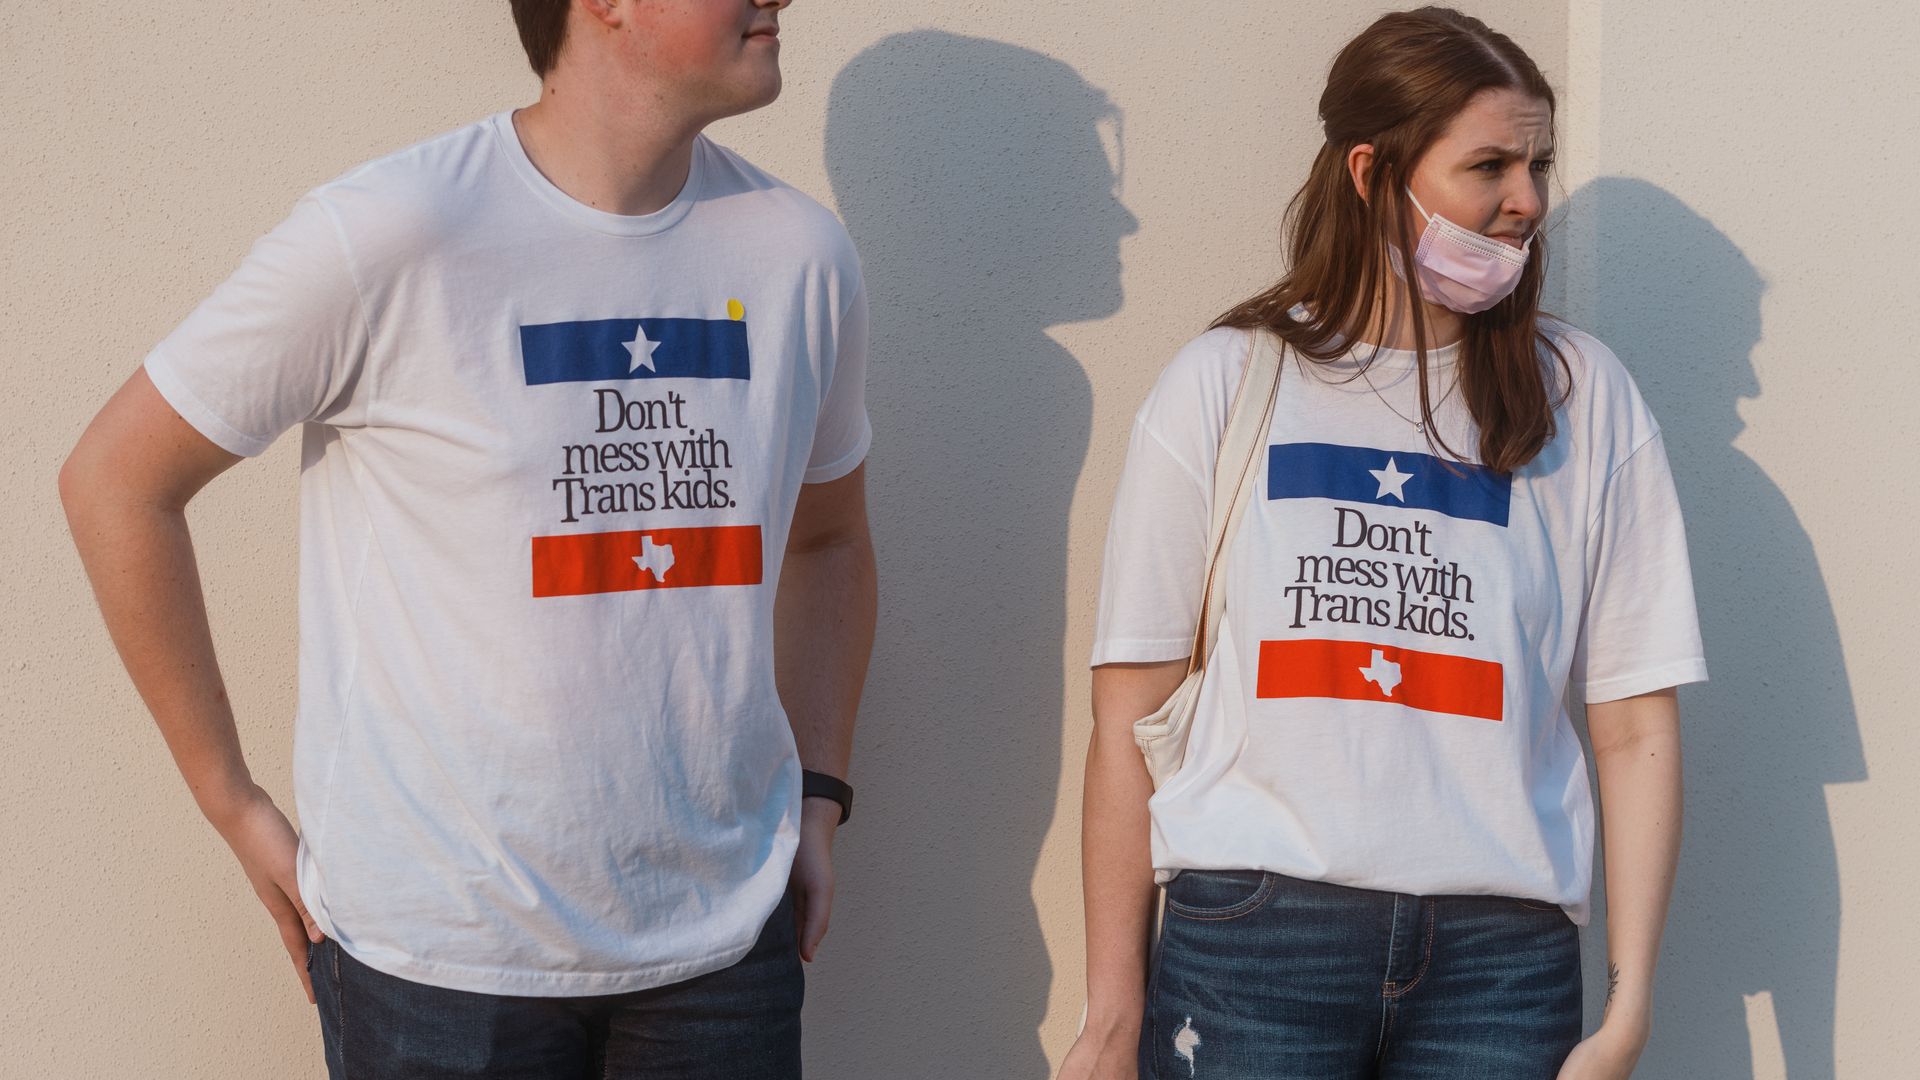 Picture of two people wearing shirts that say "don't mess with texas trans kids"